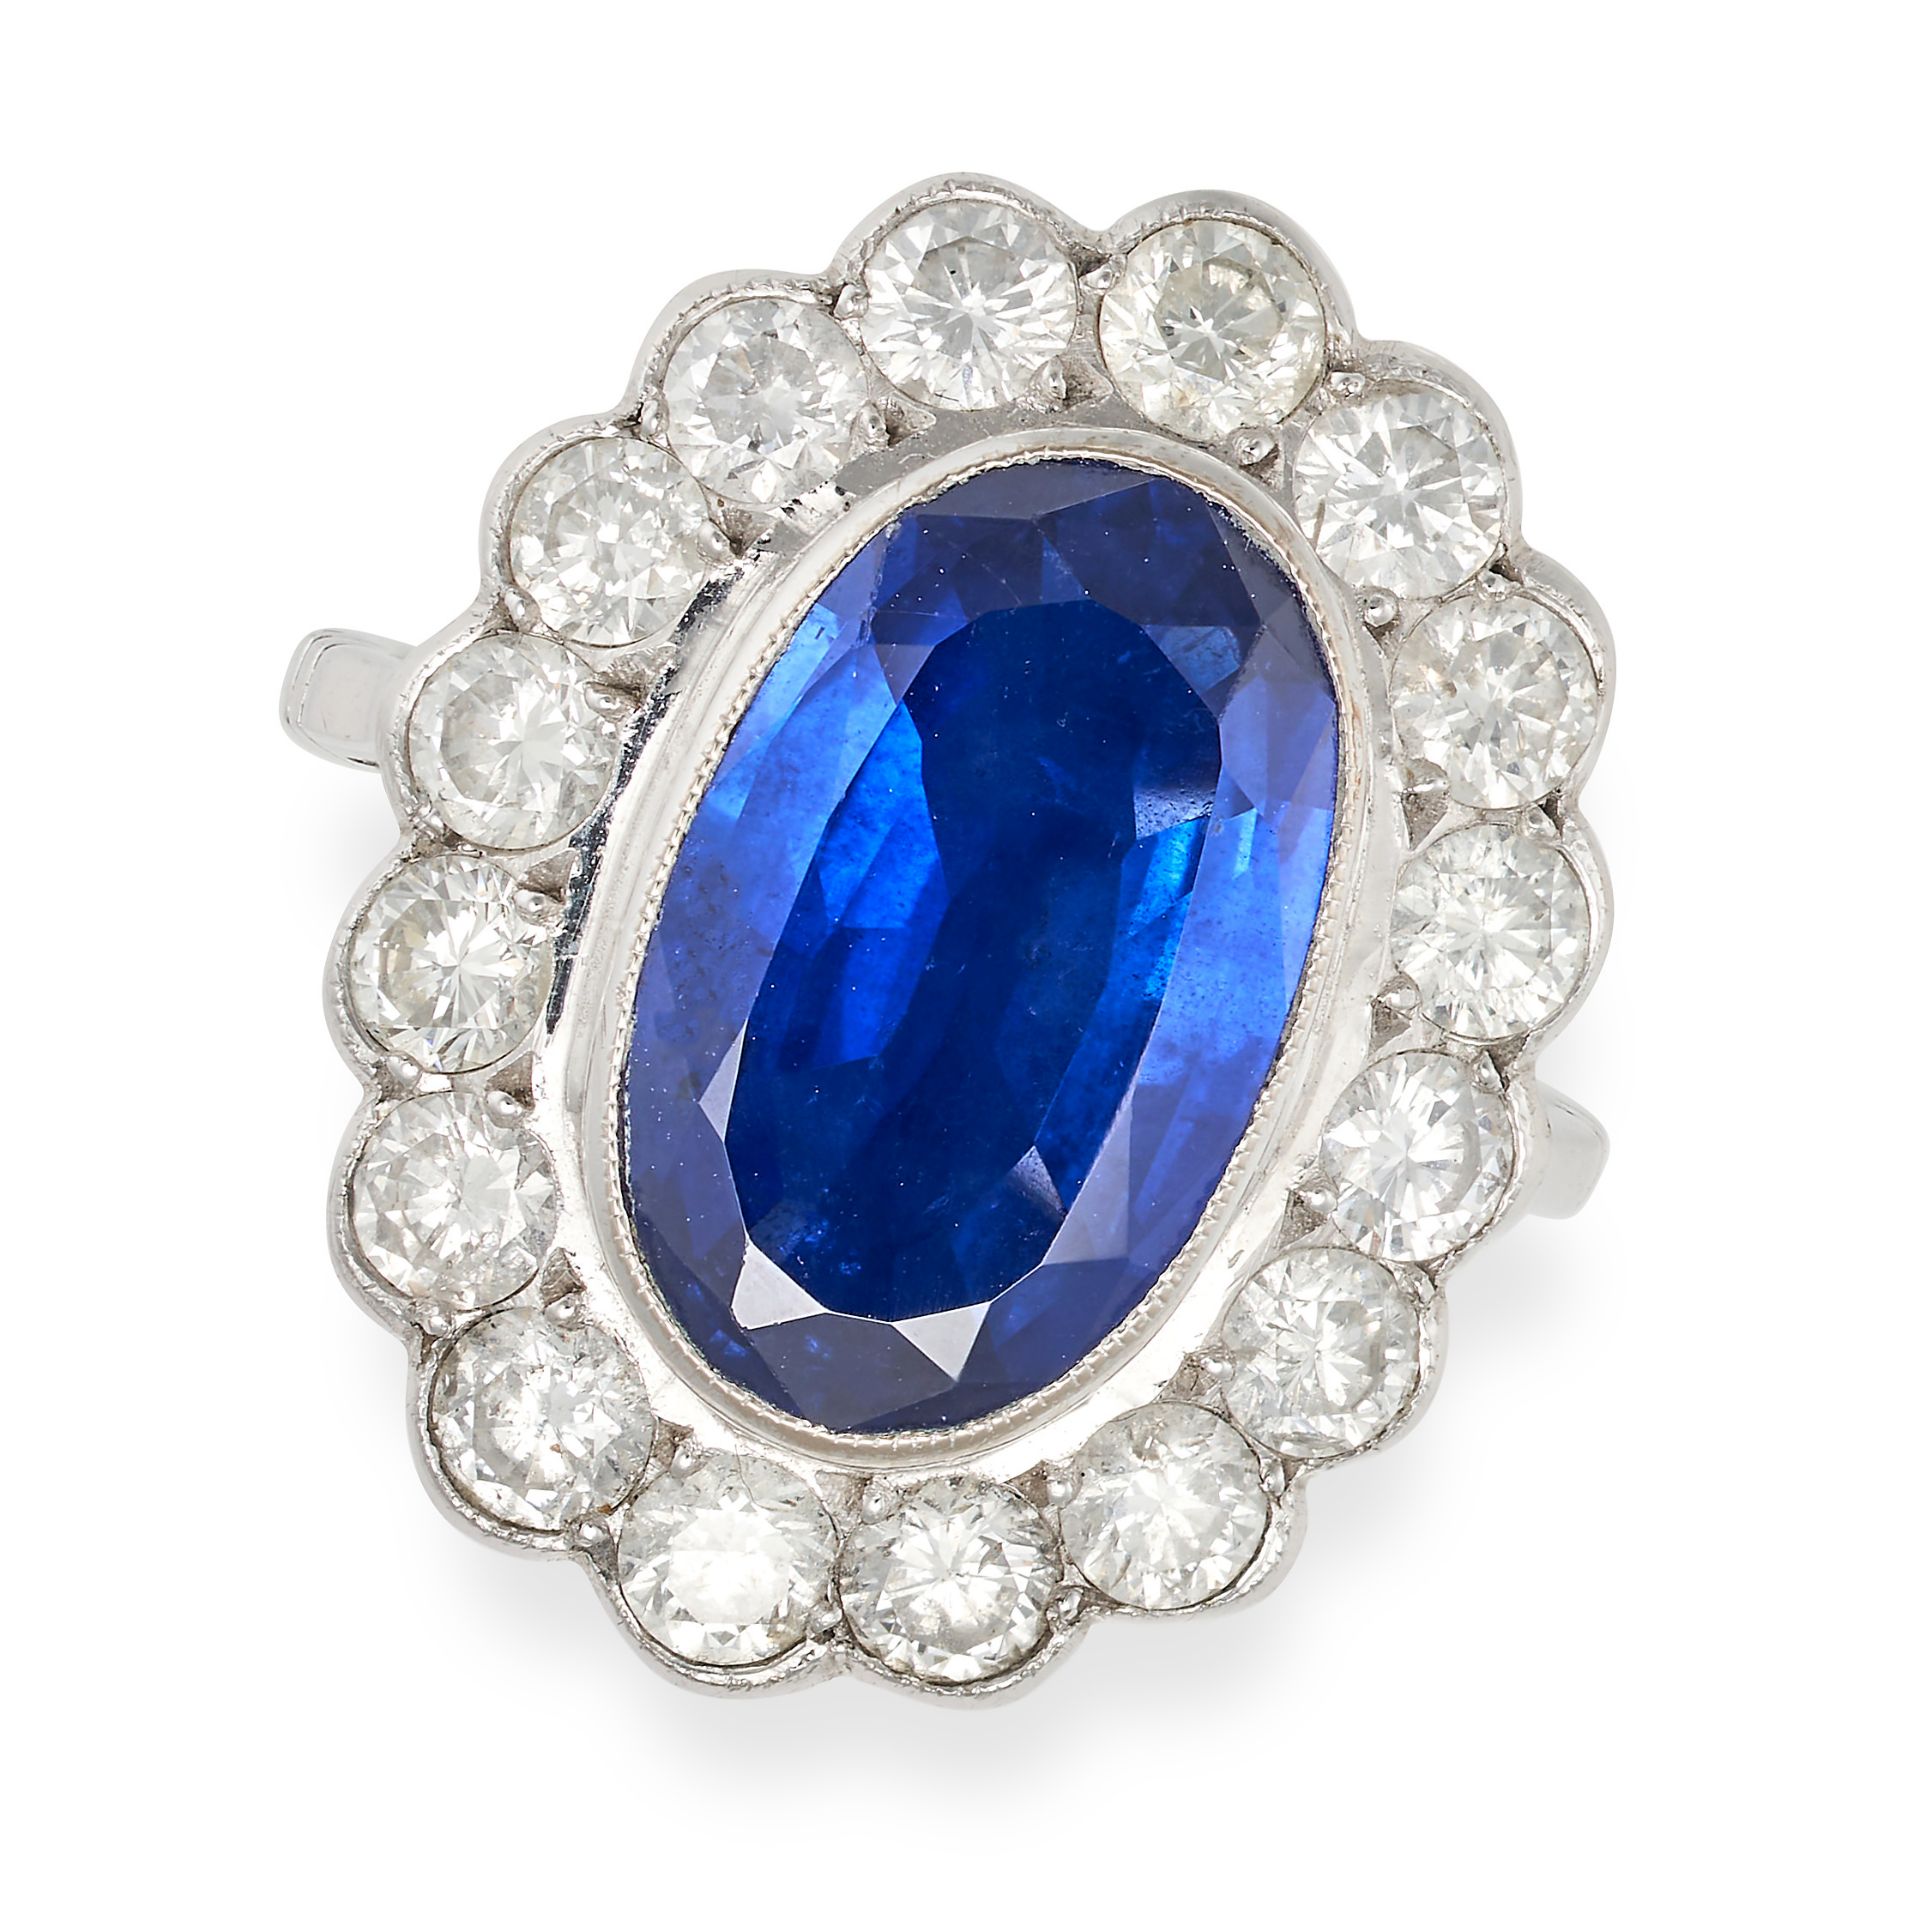 A SAPPHIRE AND DIAMOND CLUSTER RING in 18ct white gold, set with an oval cut sapphire of approxim...